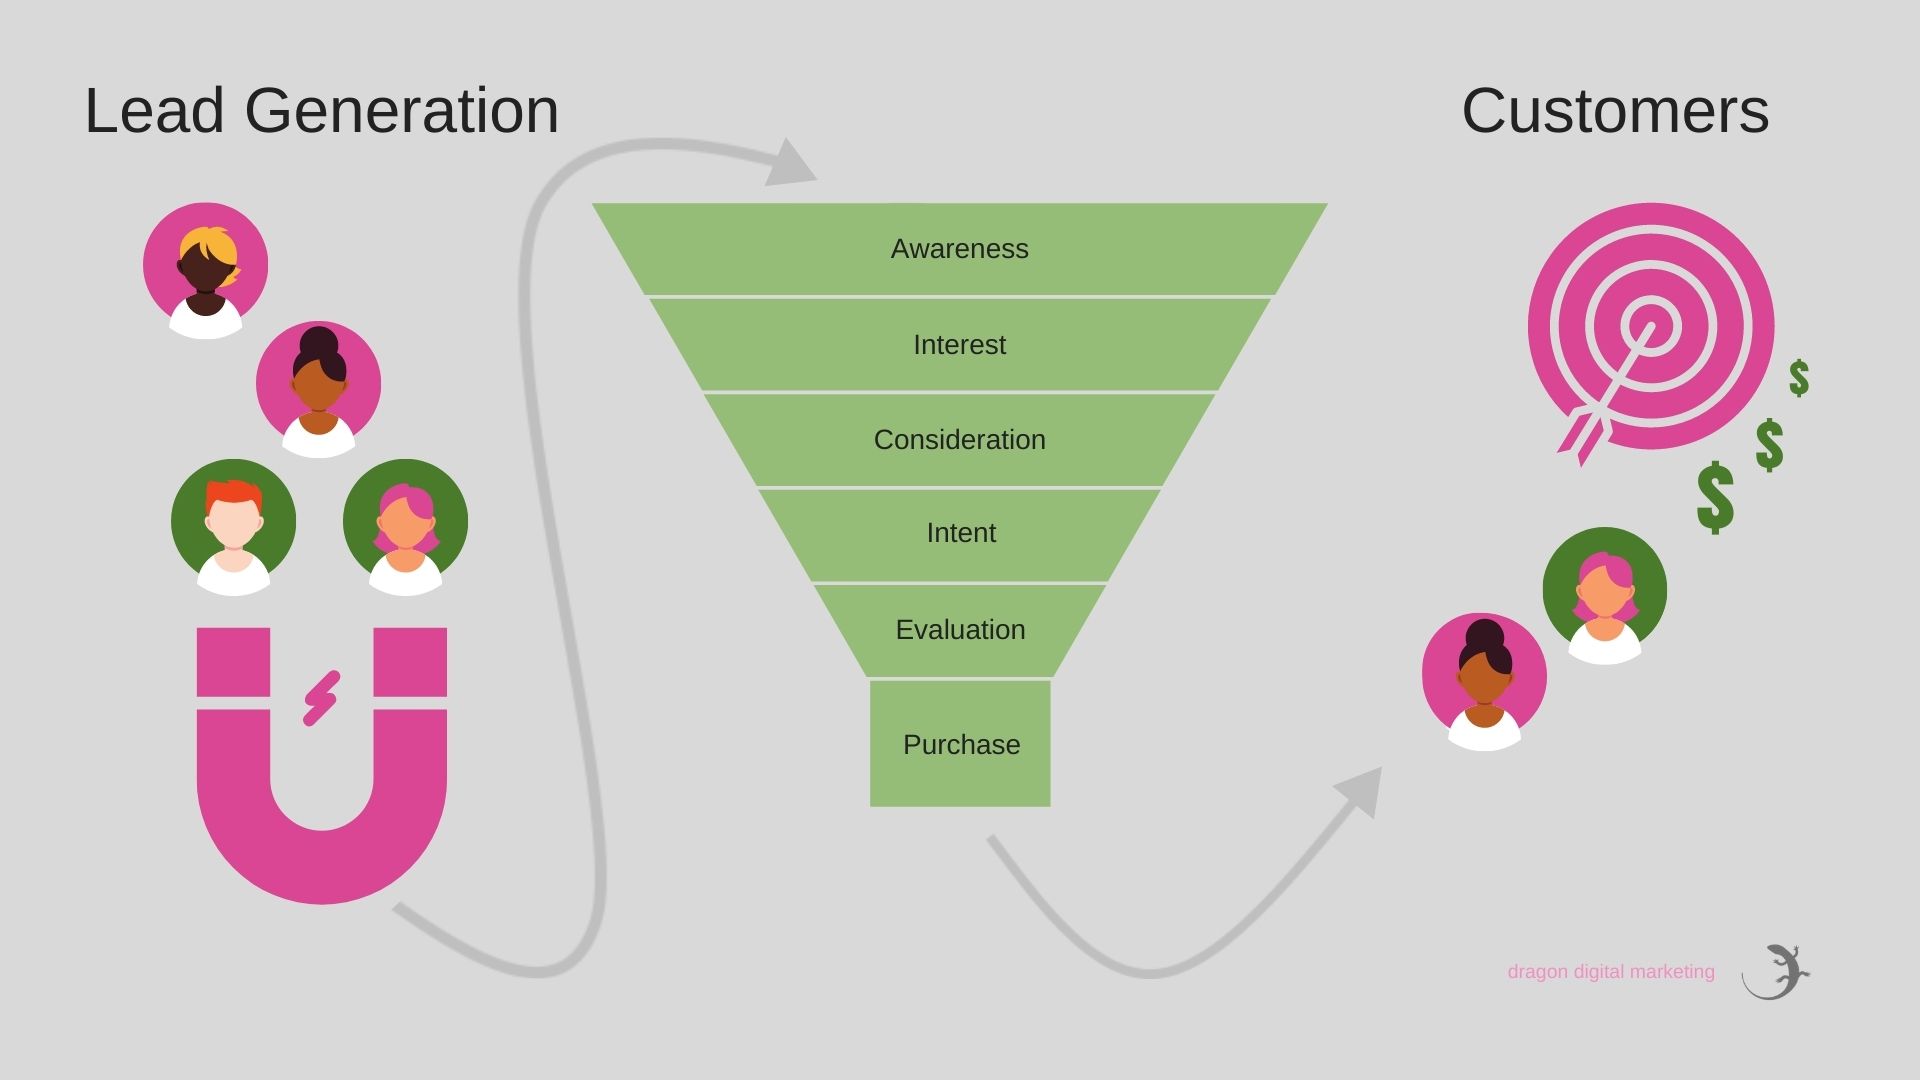 The process from lead generation to new customers